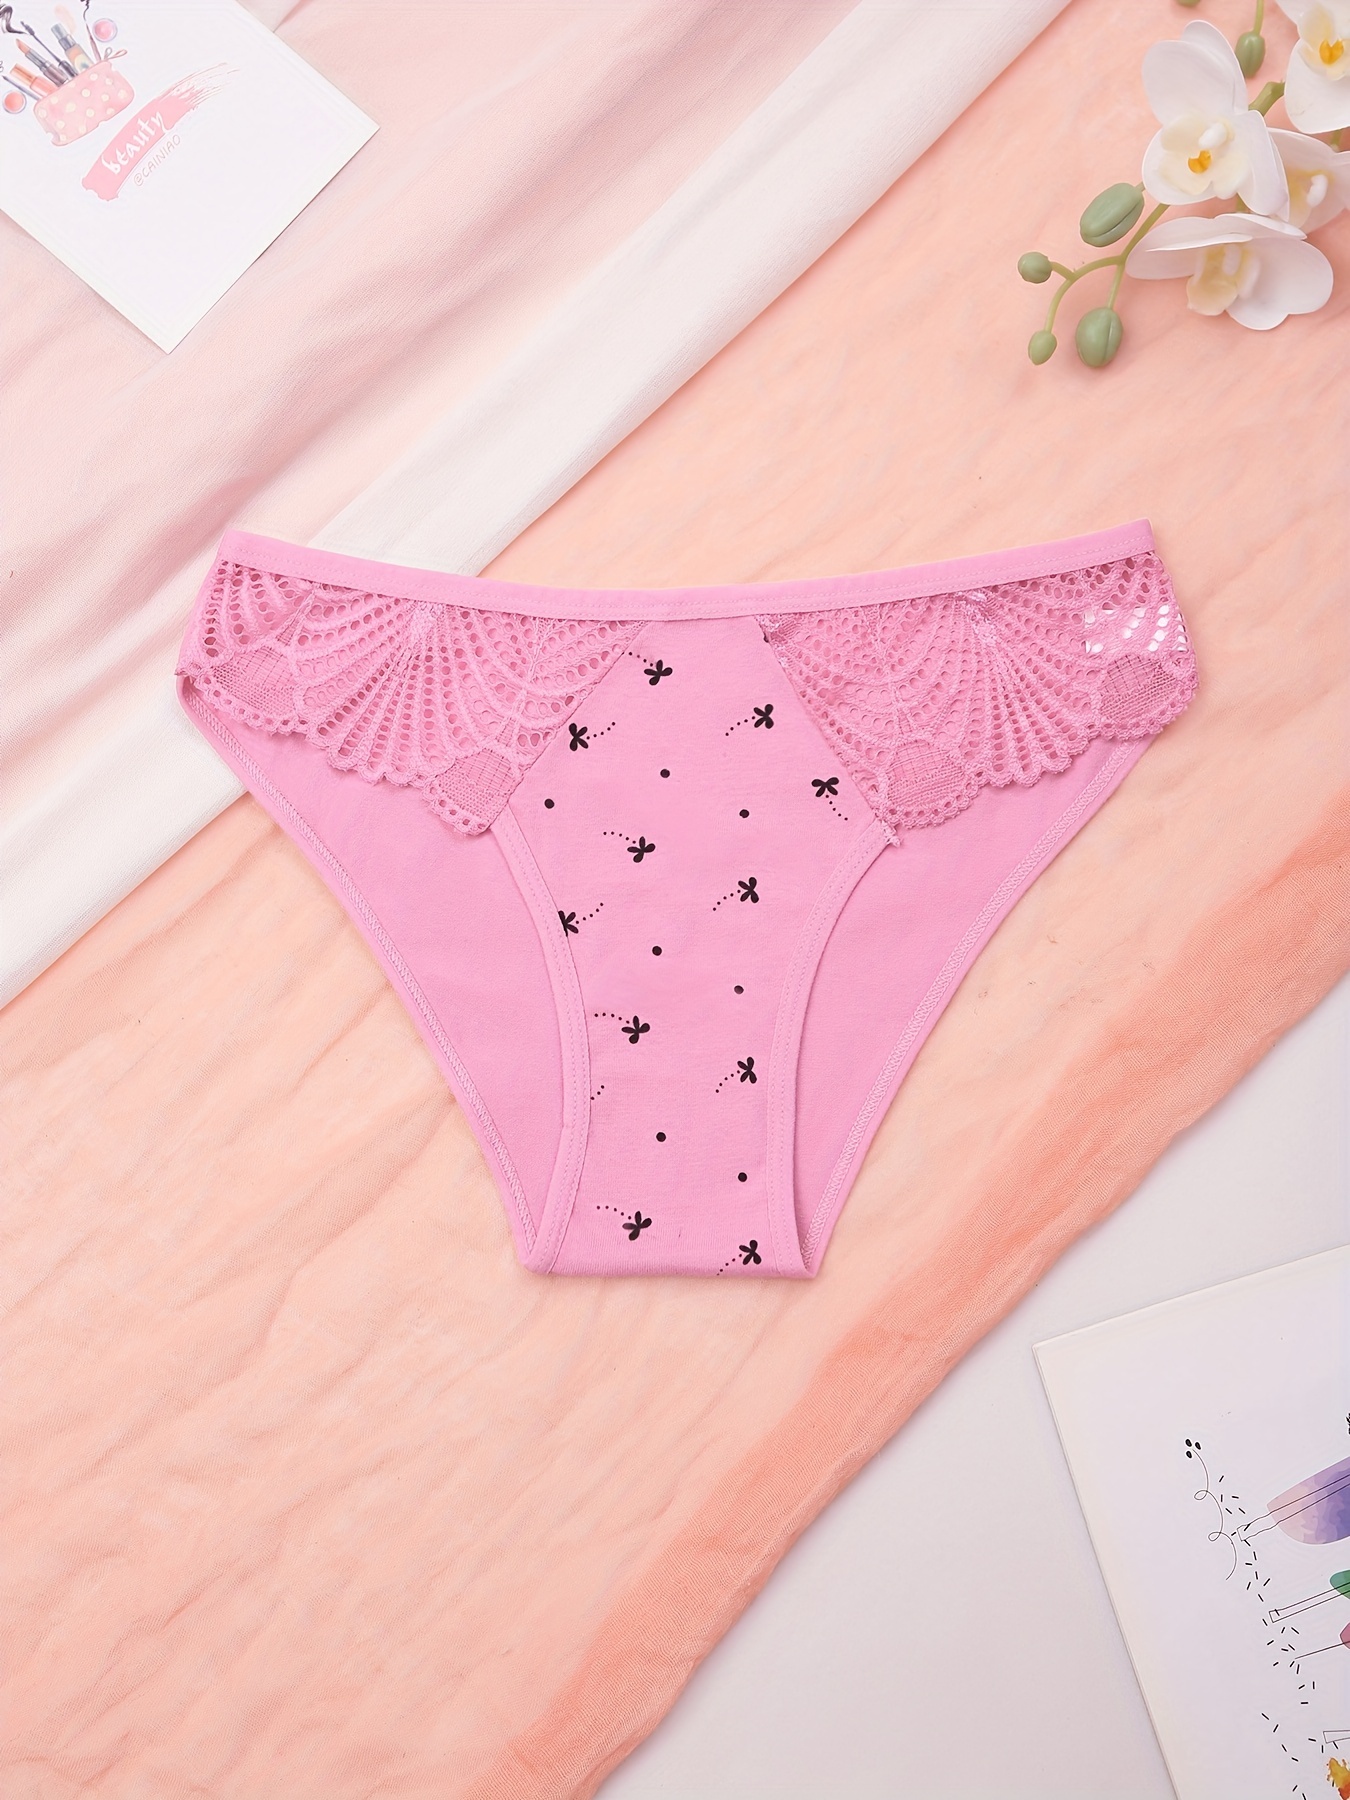 Everyday Lace-Trim Cheekster Panty - Panties - PINK